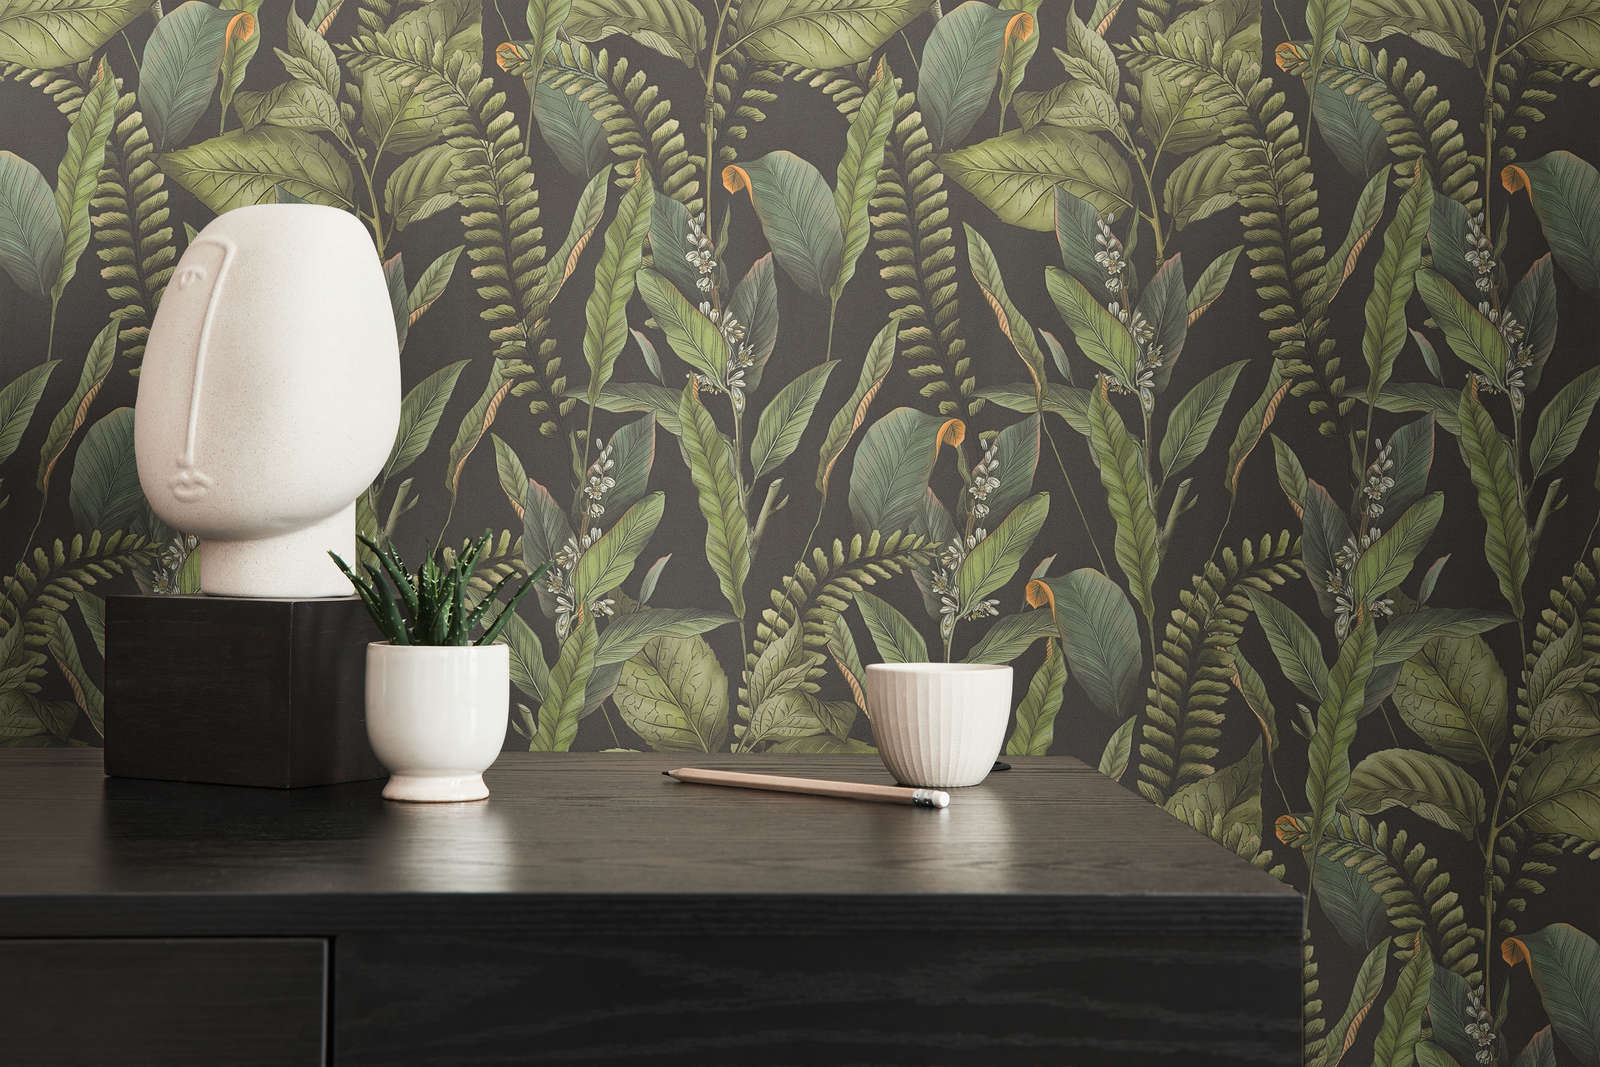             Floral style jungle wallpaper with leaves & flowers textured matt - black, green, orange
        